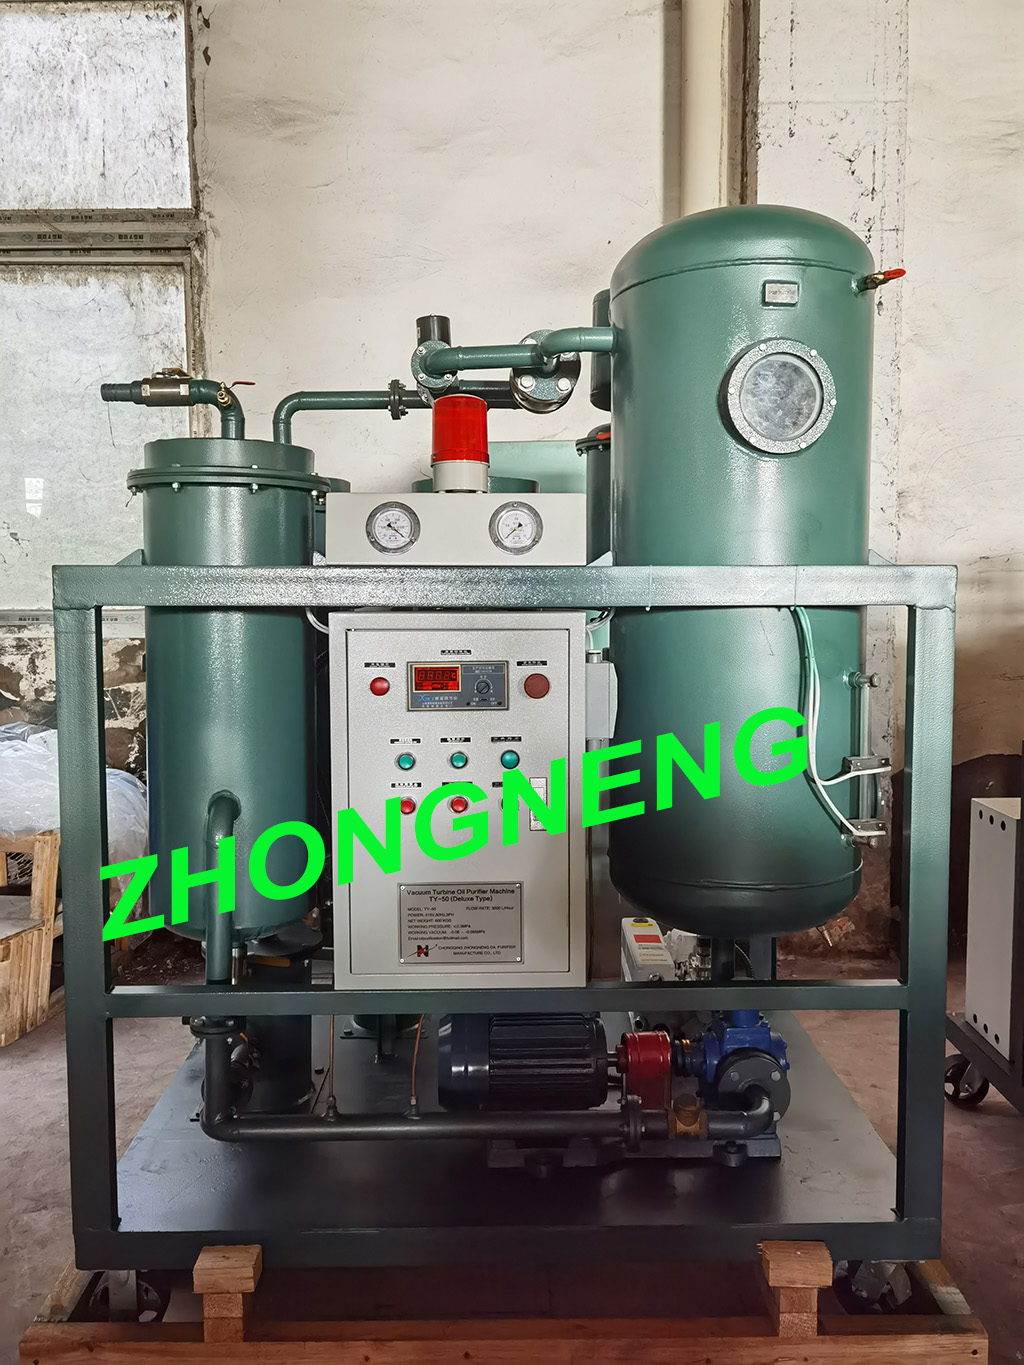 TY-50 Turbine Oil Purifier Machine Is Delivered